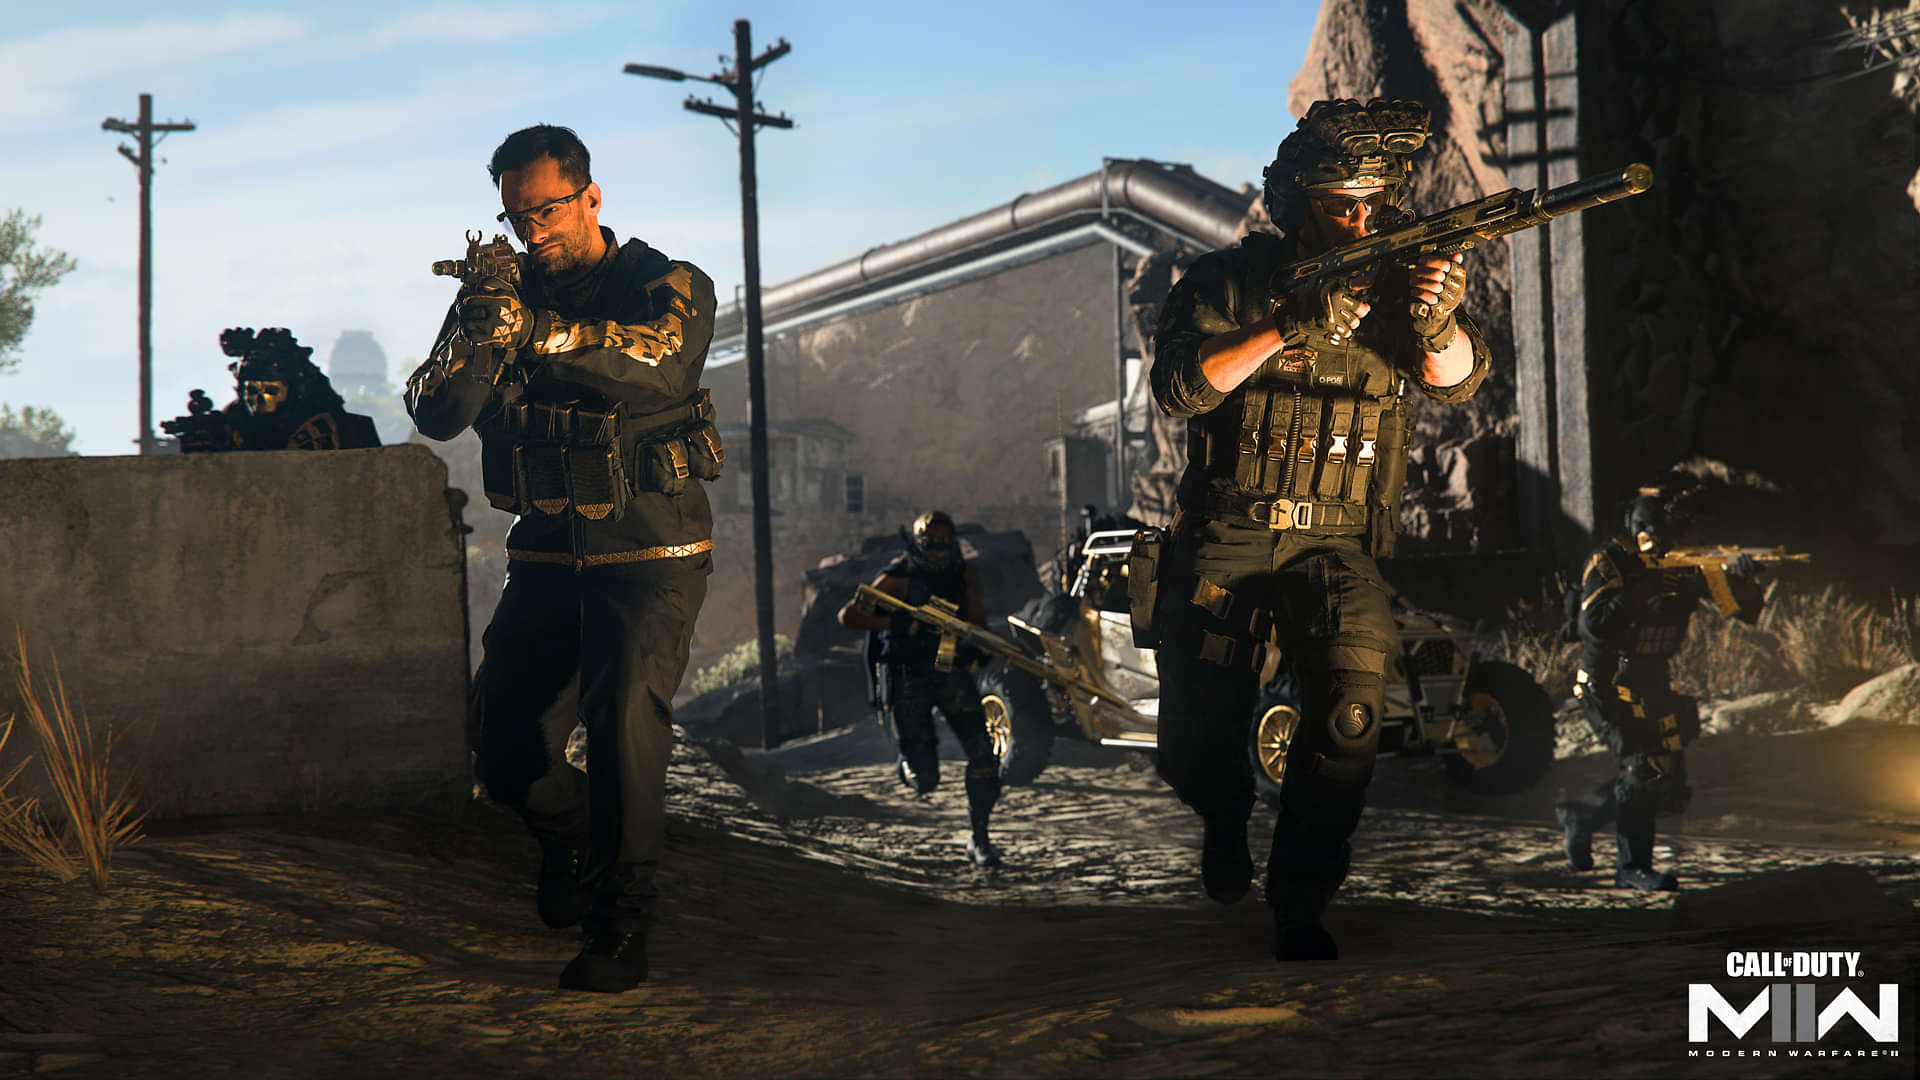 An image of multiple soldiers in Action in Warzone 2